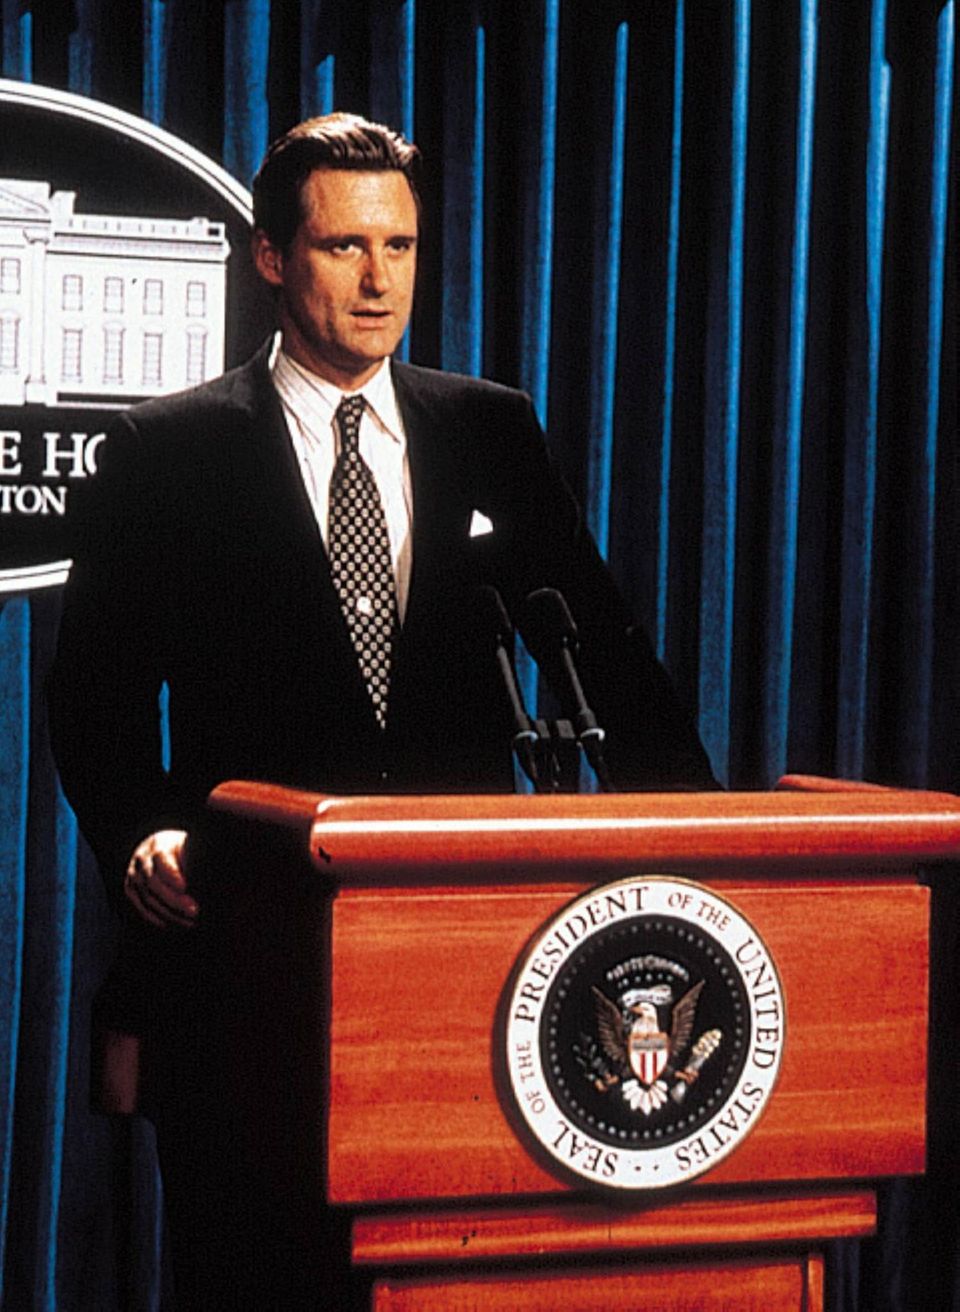 Bill Pullman in "Independence Day"